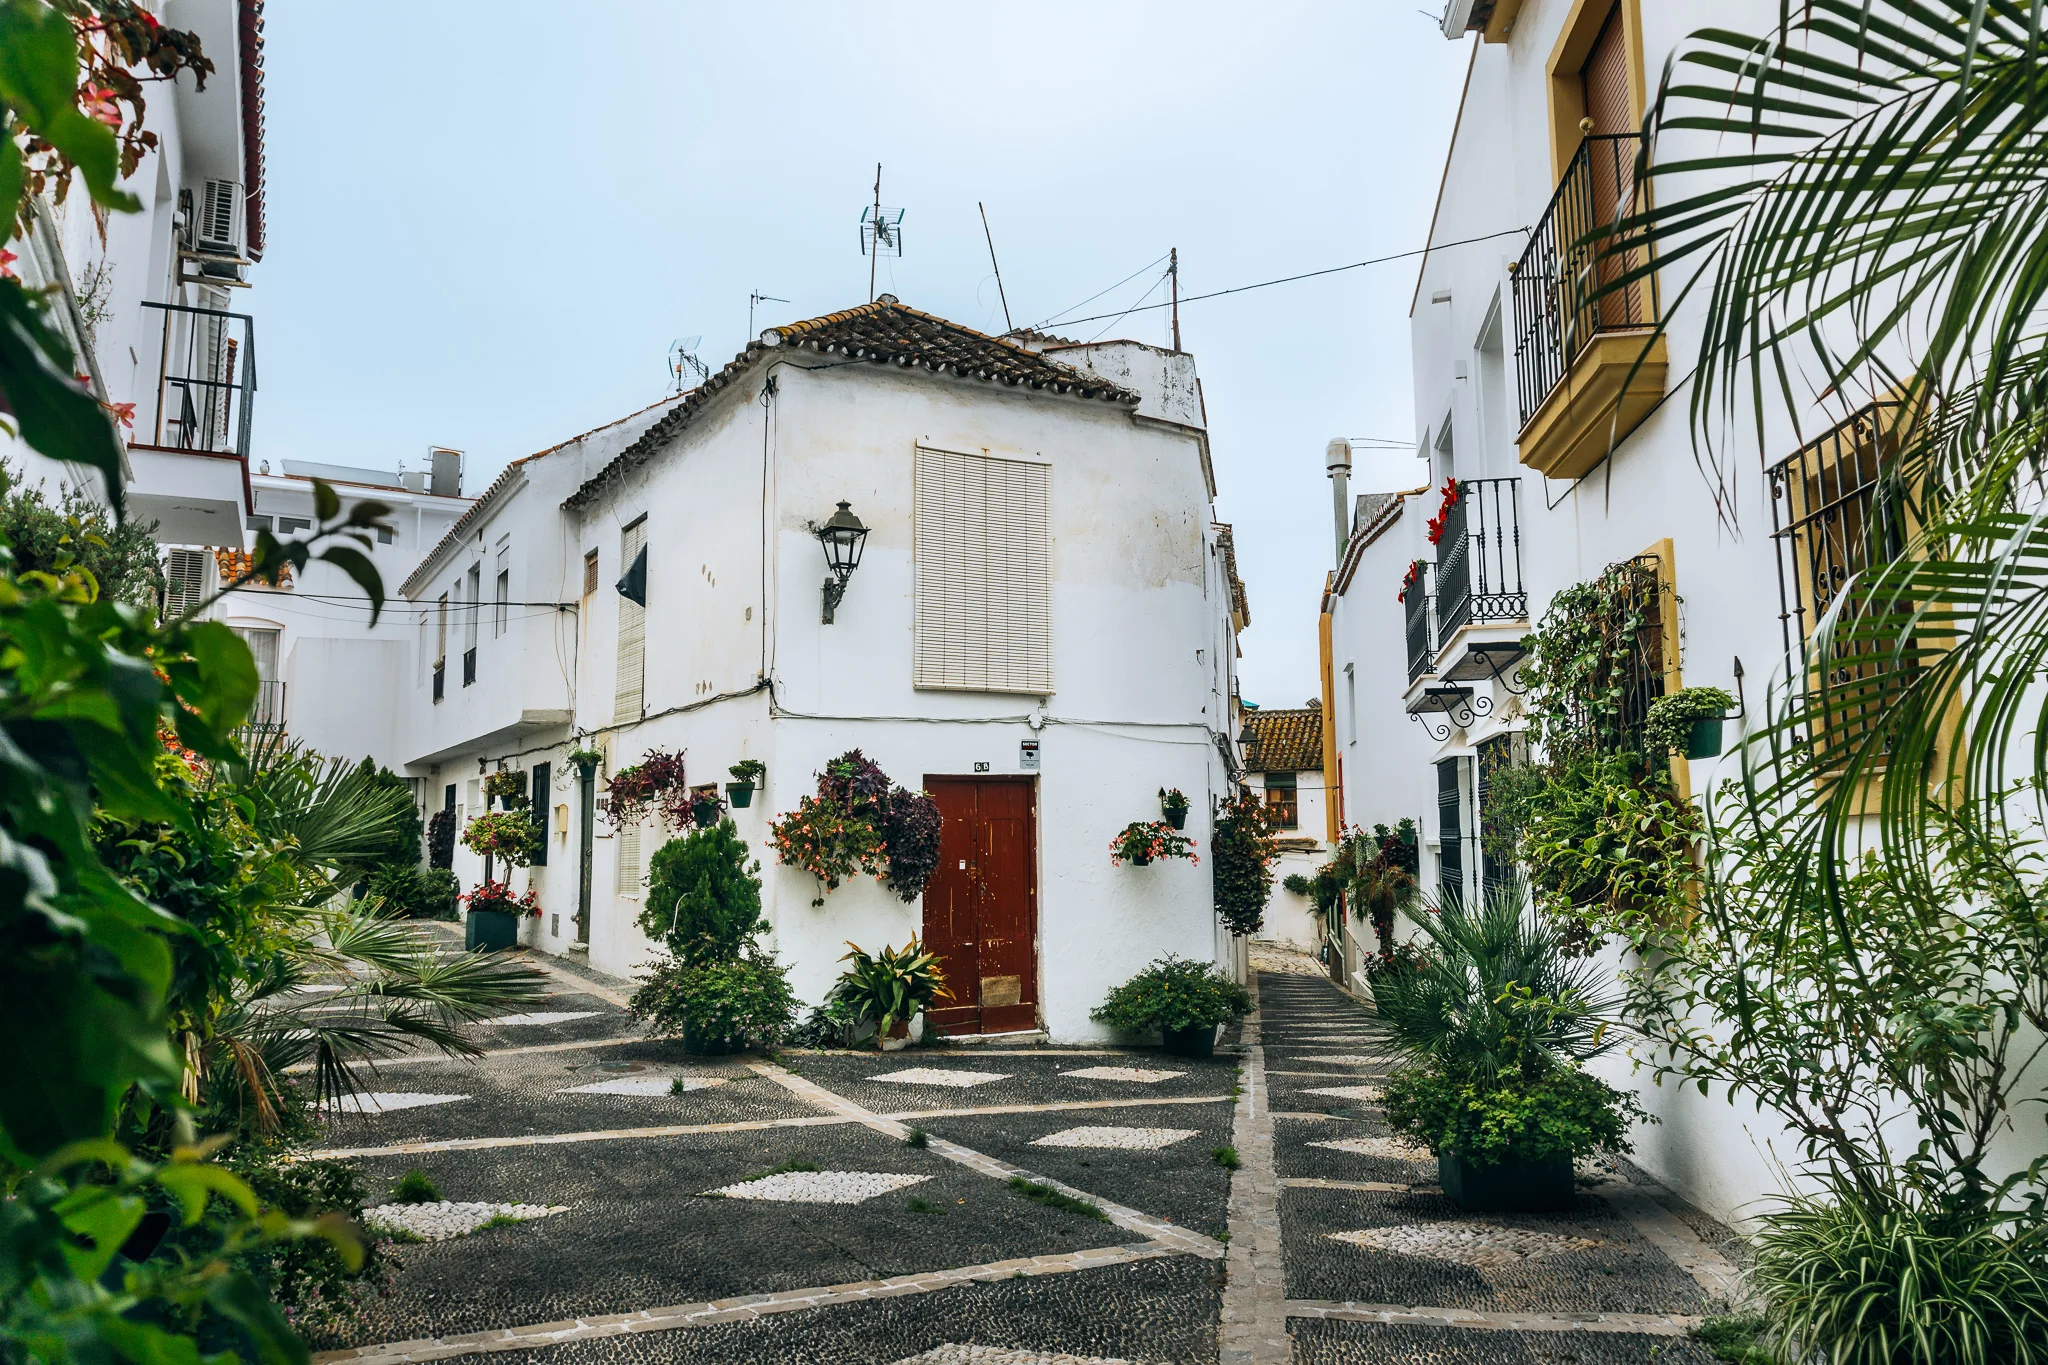 One Day In Estepona. What To See? Complete Itinerary.